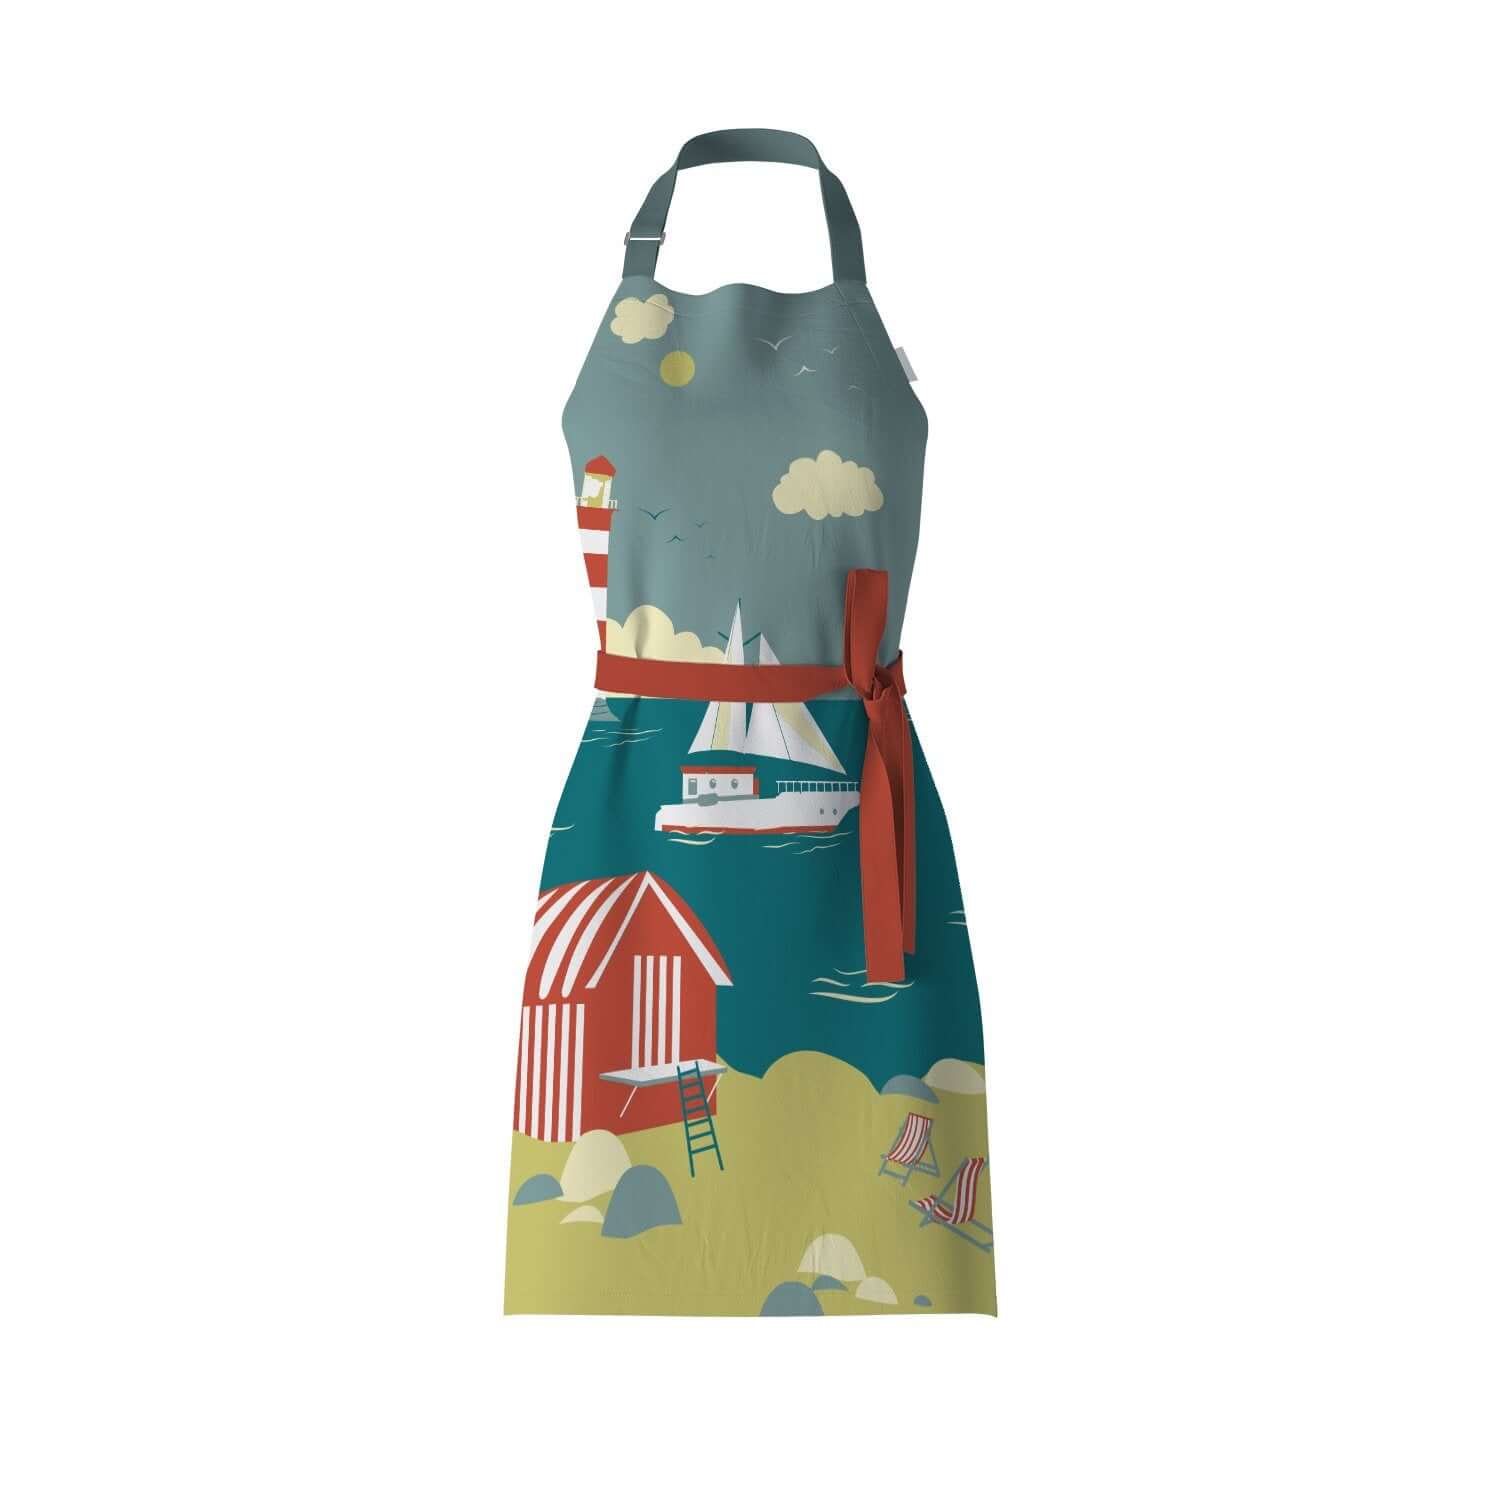 Charlie's Coast Apron with beach, beach hut, yacht, lighthouse, deck chairs and seaside scene on an adults kitchen apron from mustard and Gray 